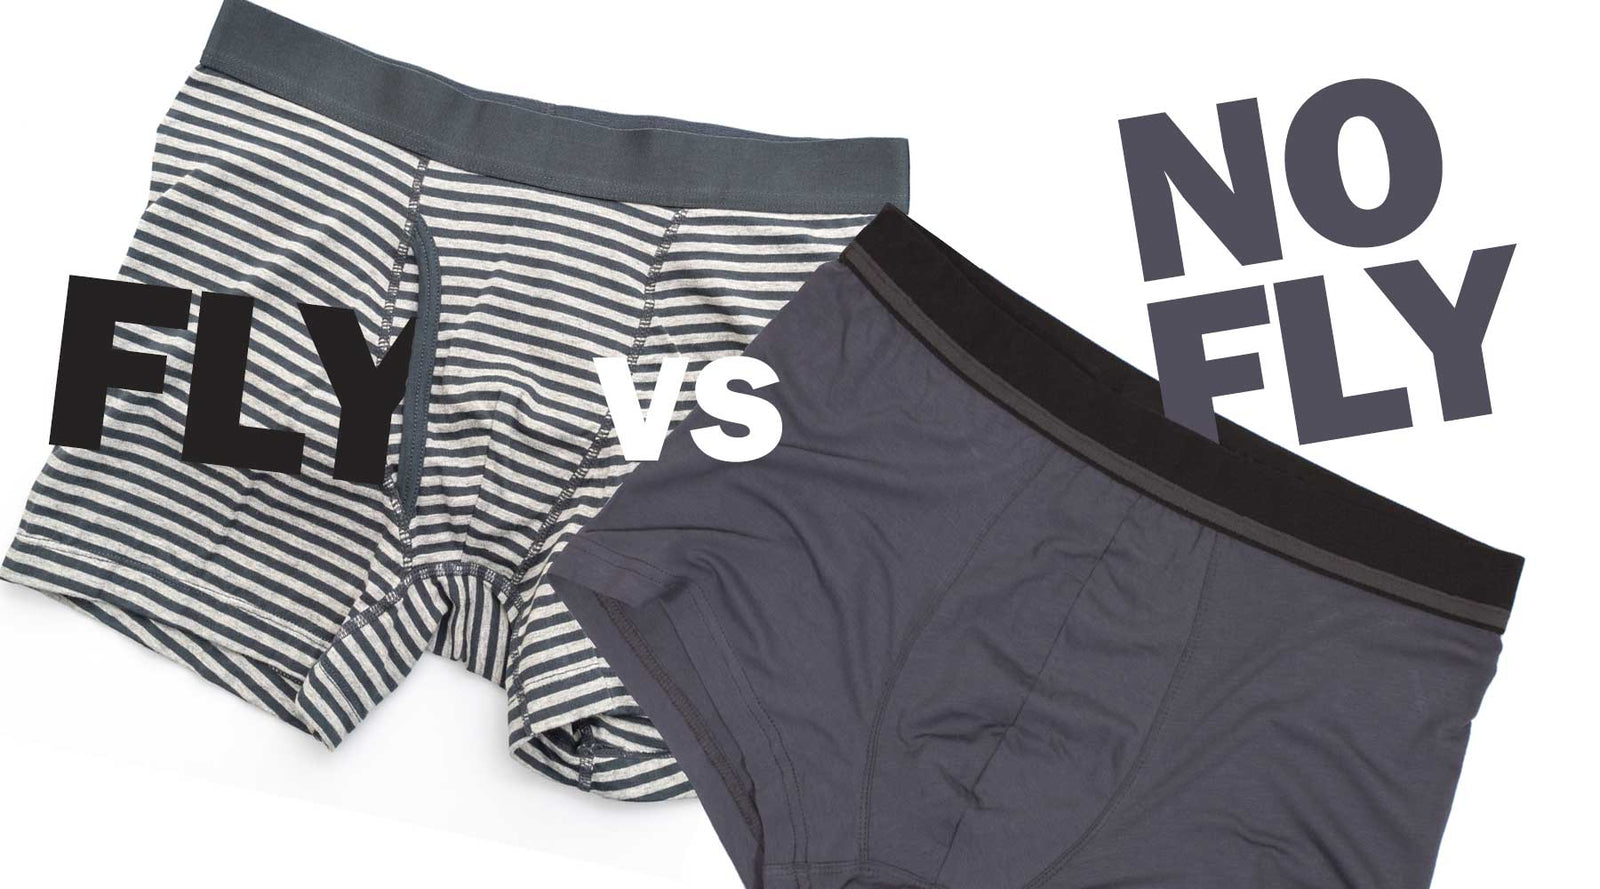 Best running underwear for men - Check out our tips here! - Inspiration